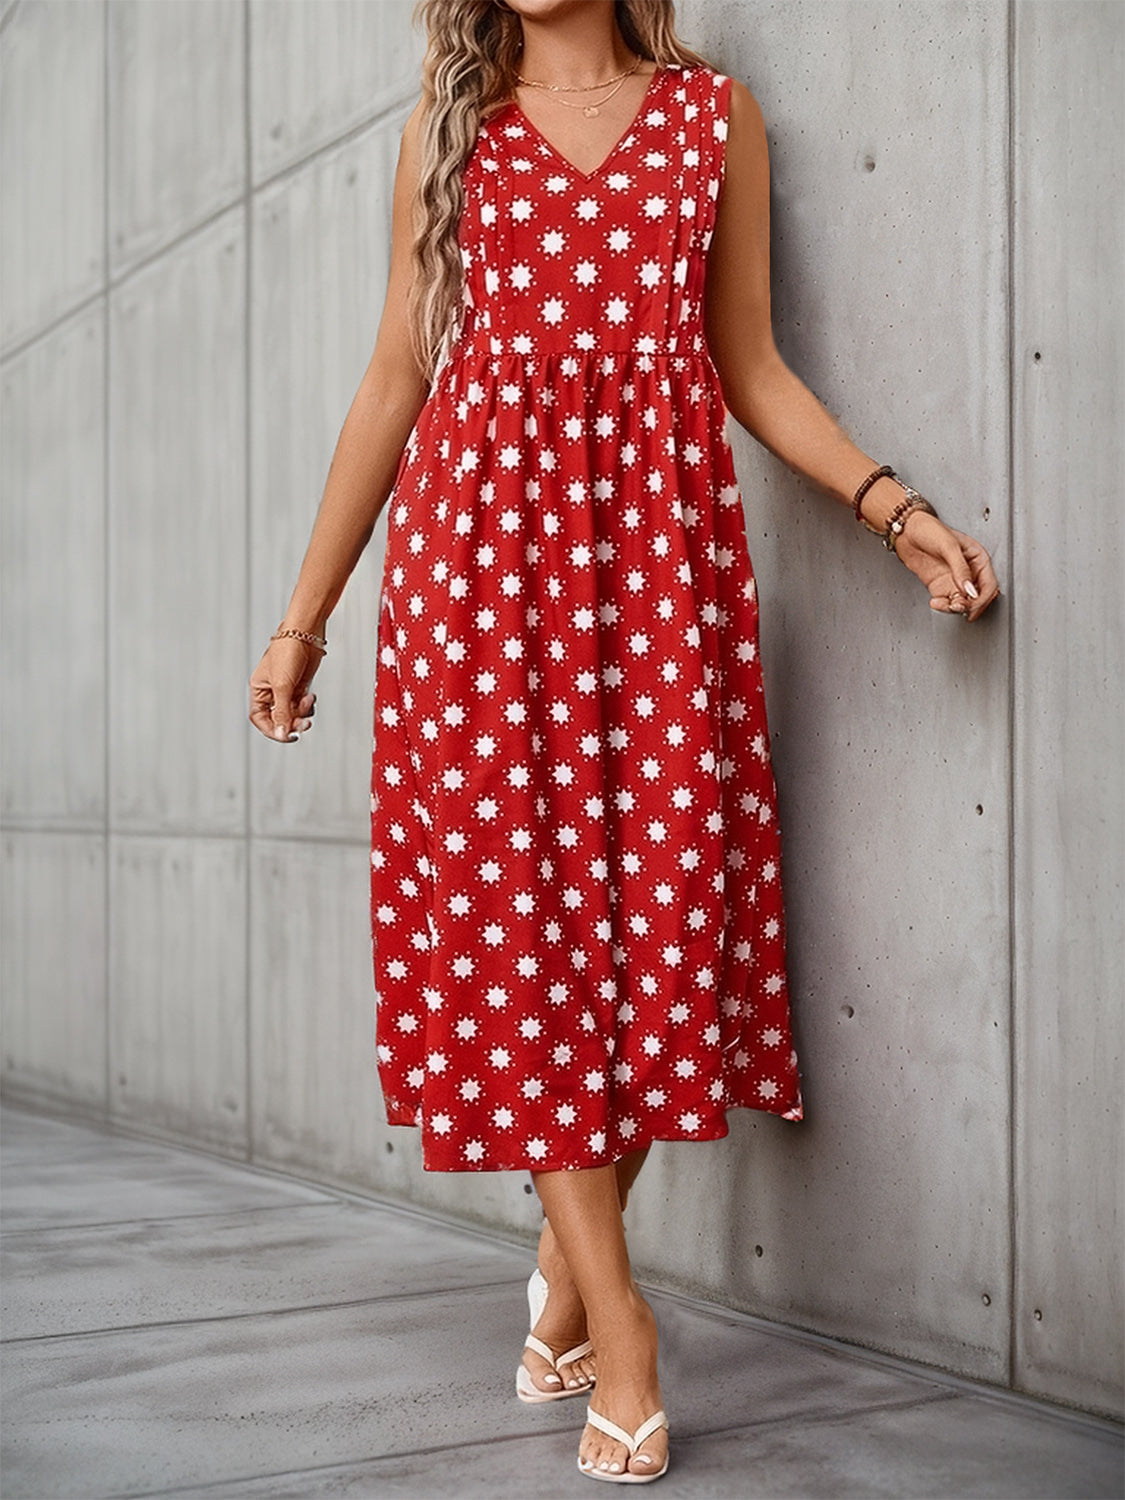 Sleeveless red dress adorned with white daisy motifs